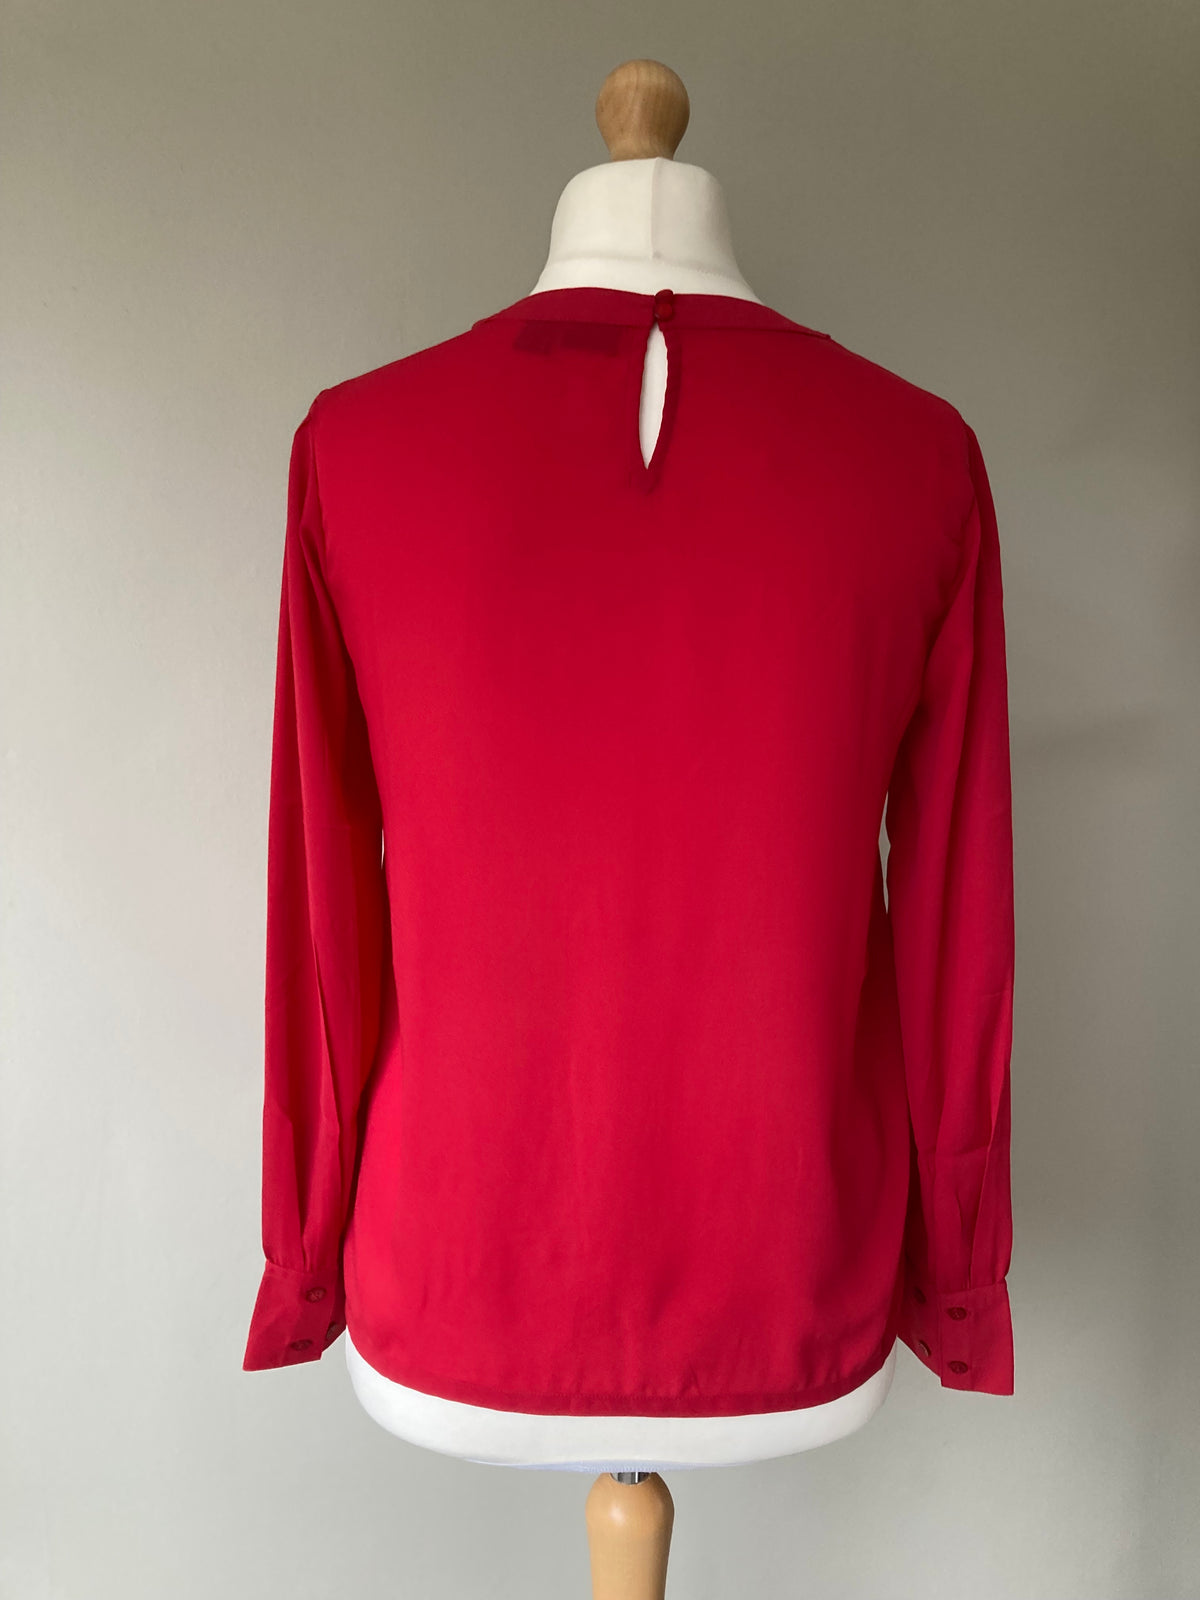 Red Frill Blouse by ANISTON